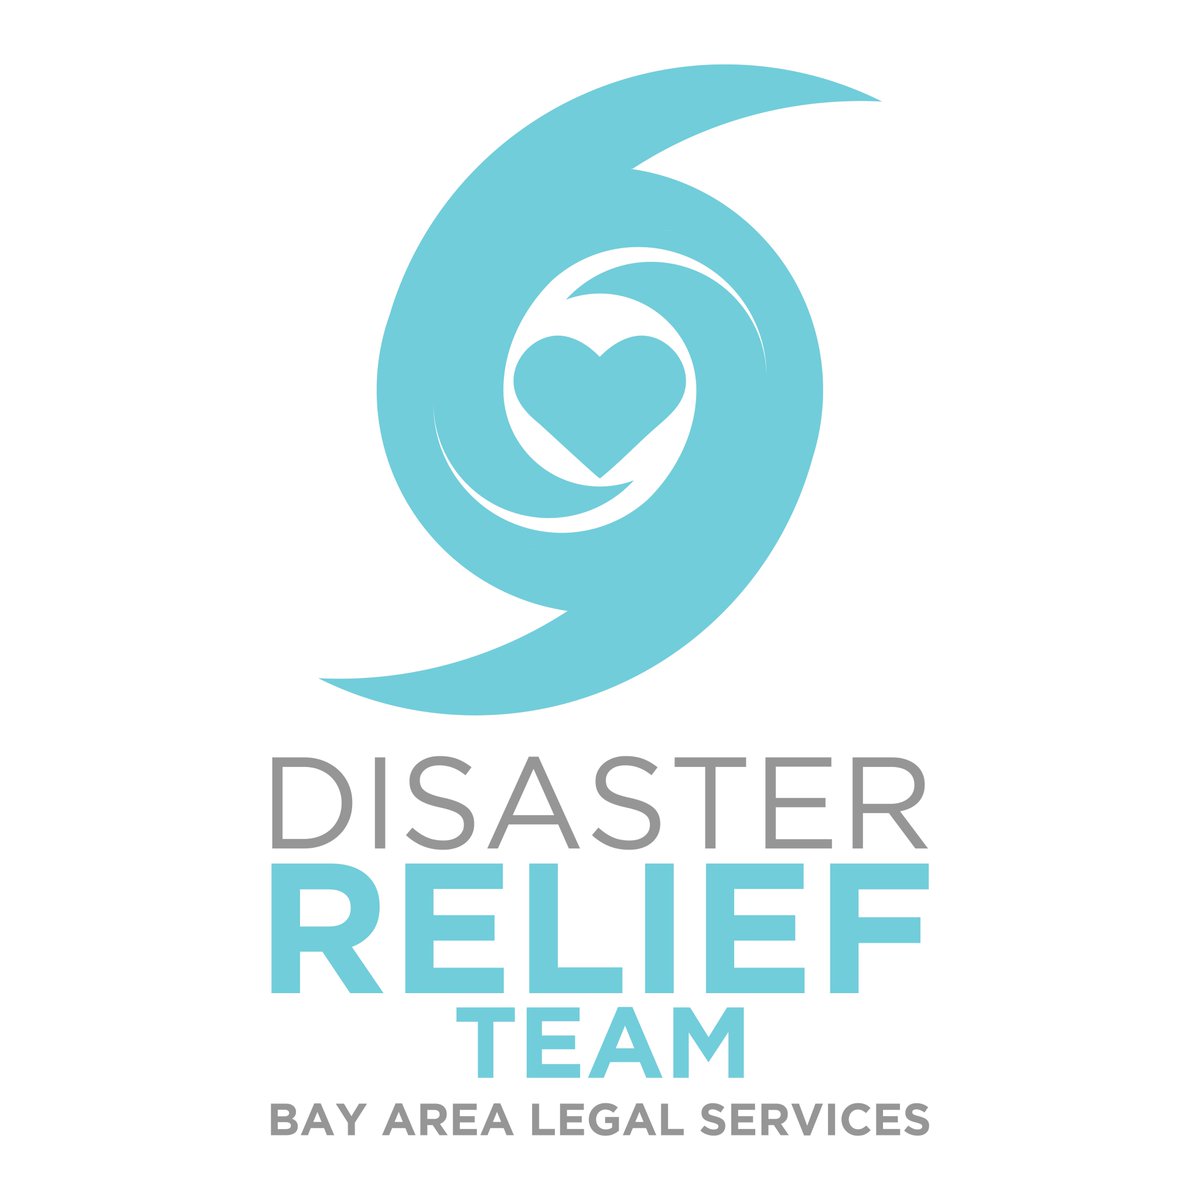 📣 Pro Bono Attorneys Needed! 📣Hurricane season is rapidly approaching 🌀 Join our Disaster Relief Team and lend your legal expertise to disaster survivors. ⚖️ Email drvolunteer@bals.org for registration and more information. #disasterrelief #FLProBonoMatters